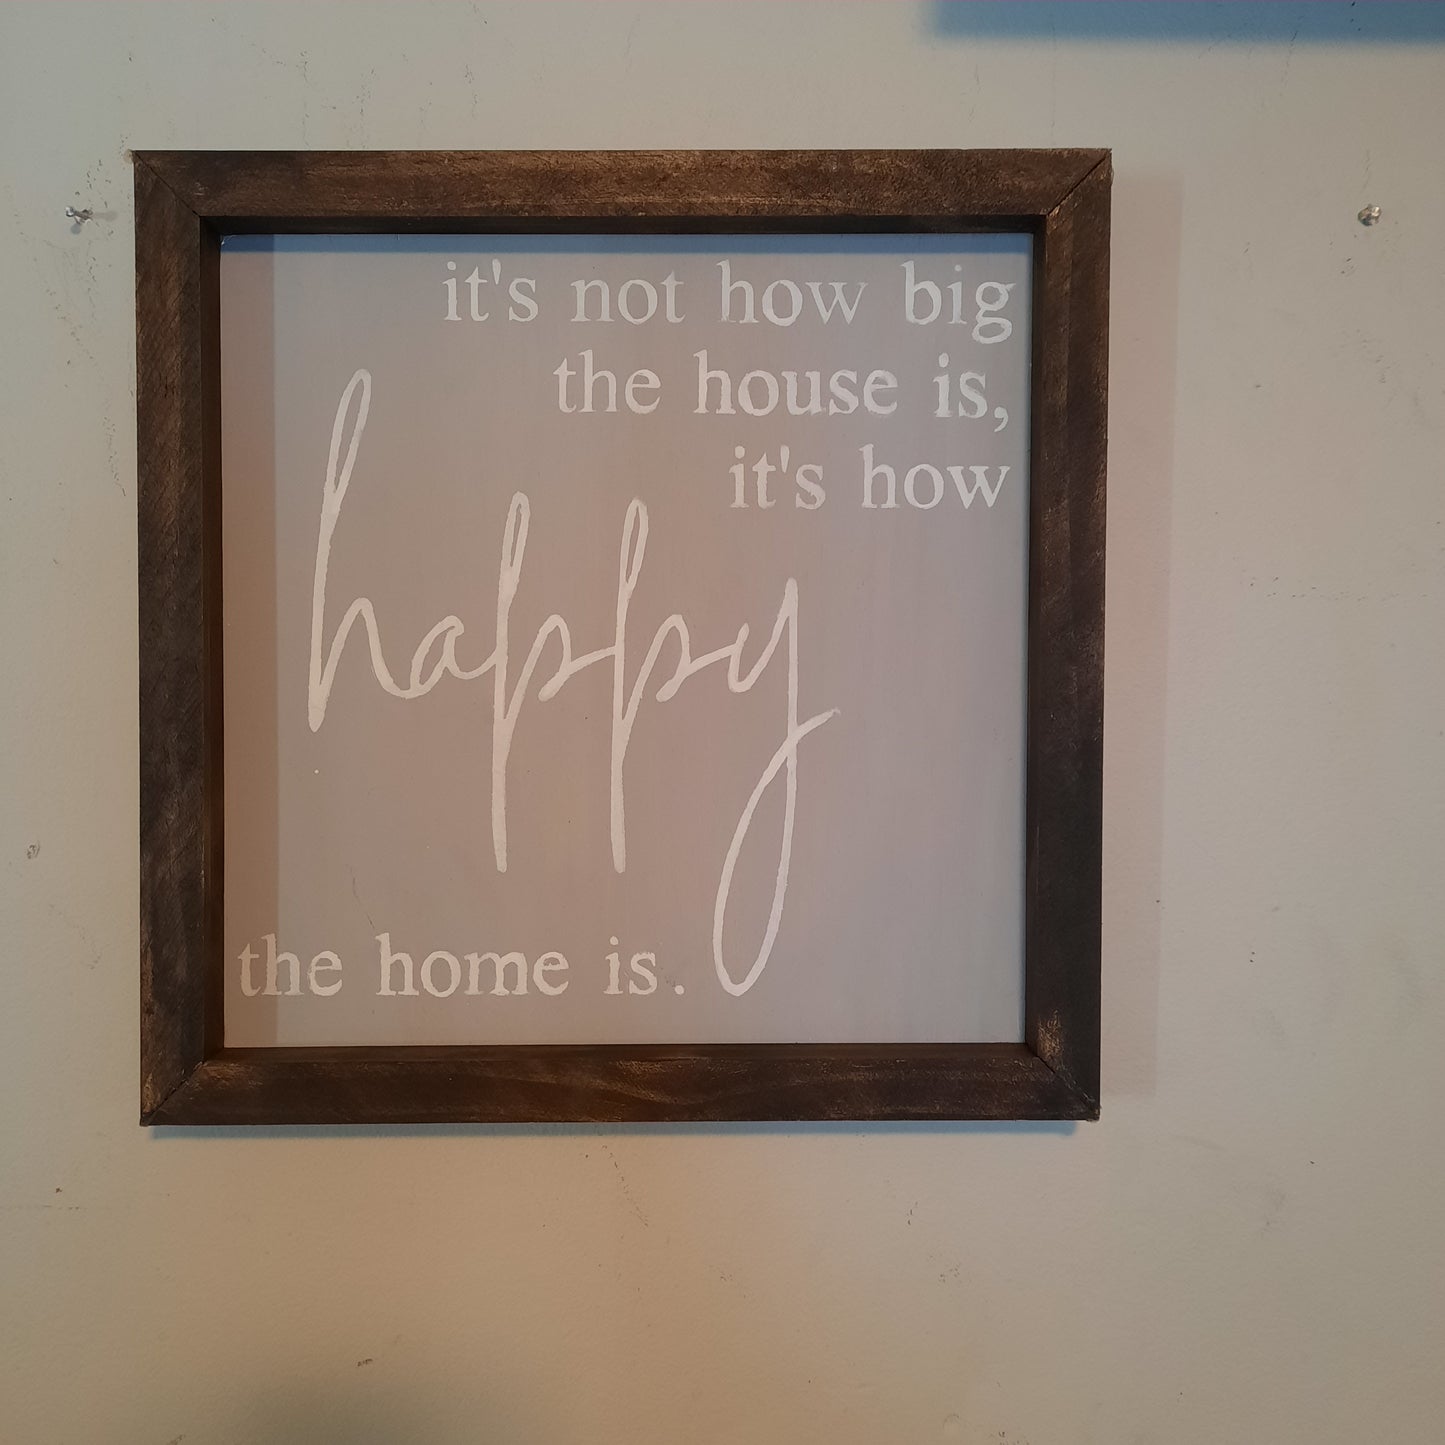 Its not how big the house is, its how happy the home is